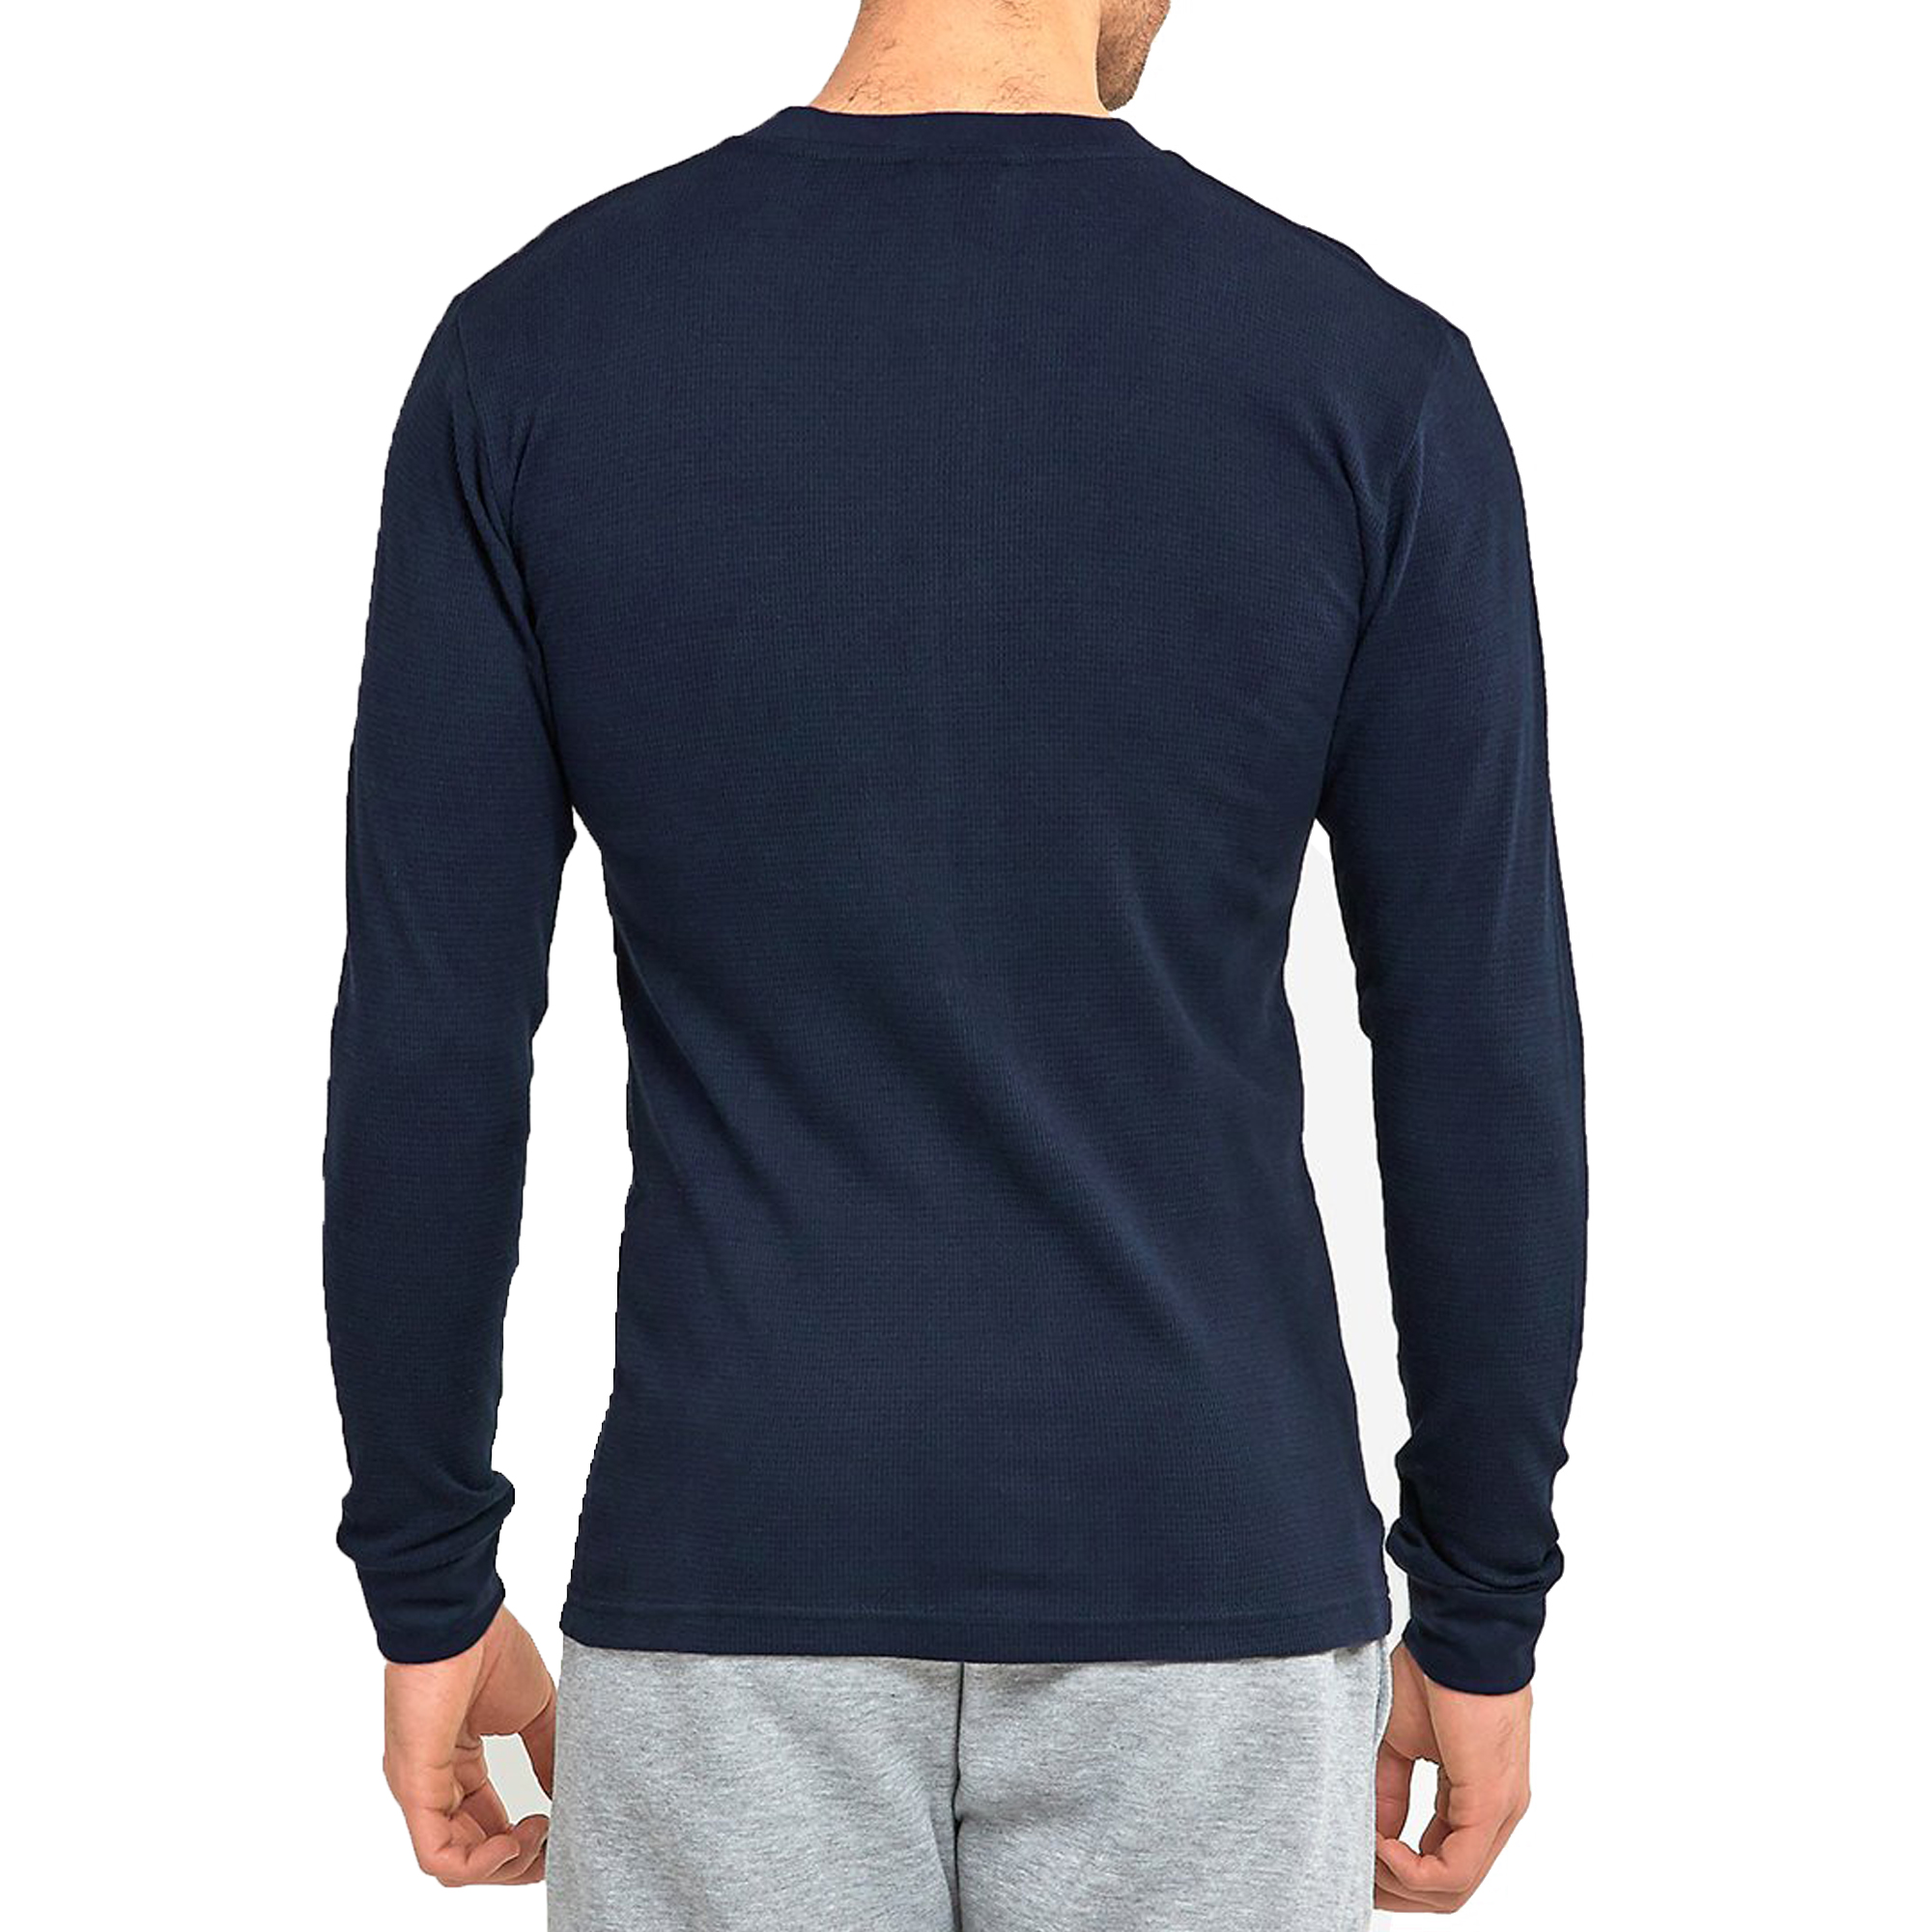 Mens Cotton Blend Waffle Knit or Plain Henley Thermal Top Thick Long ...